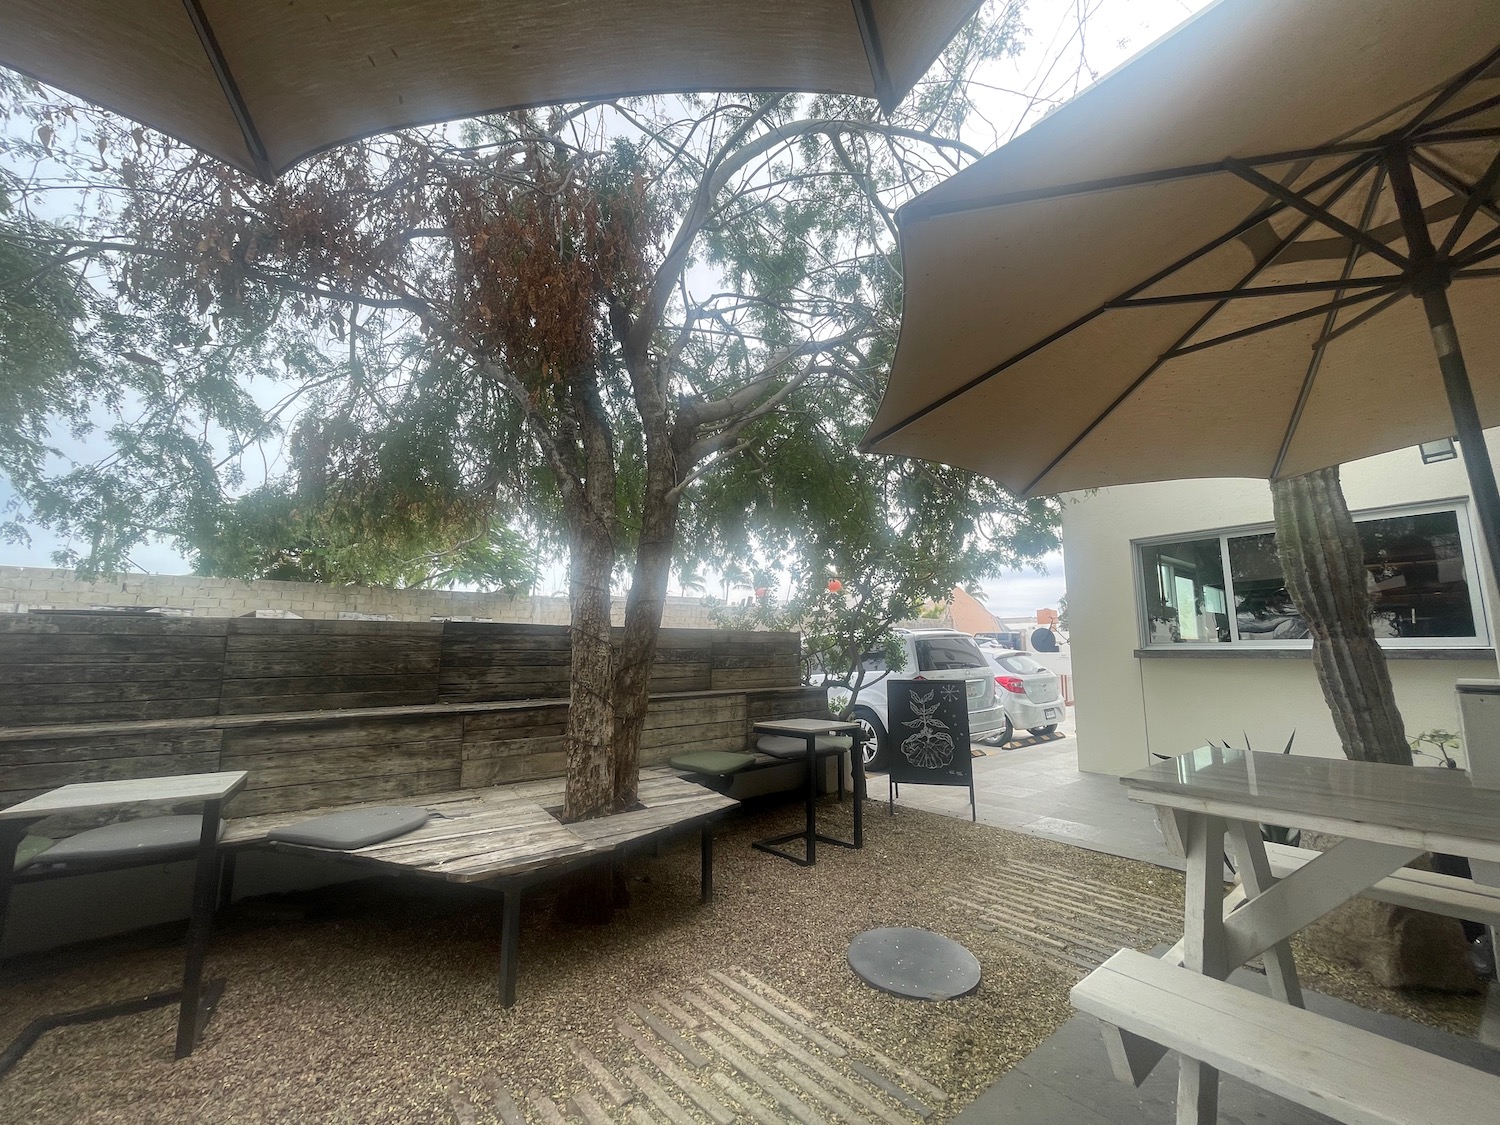 a patio with a tree and umbrellas